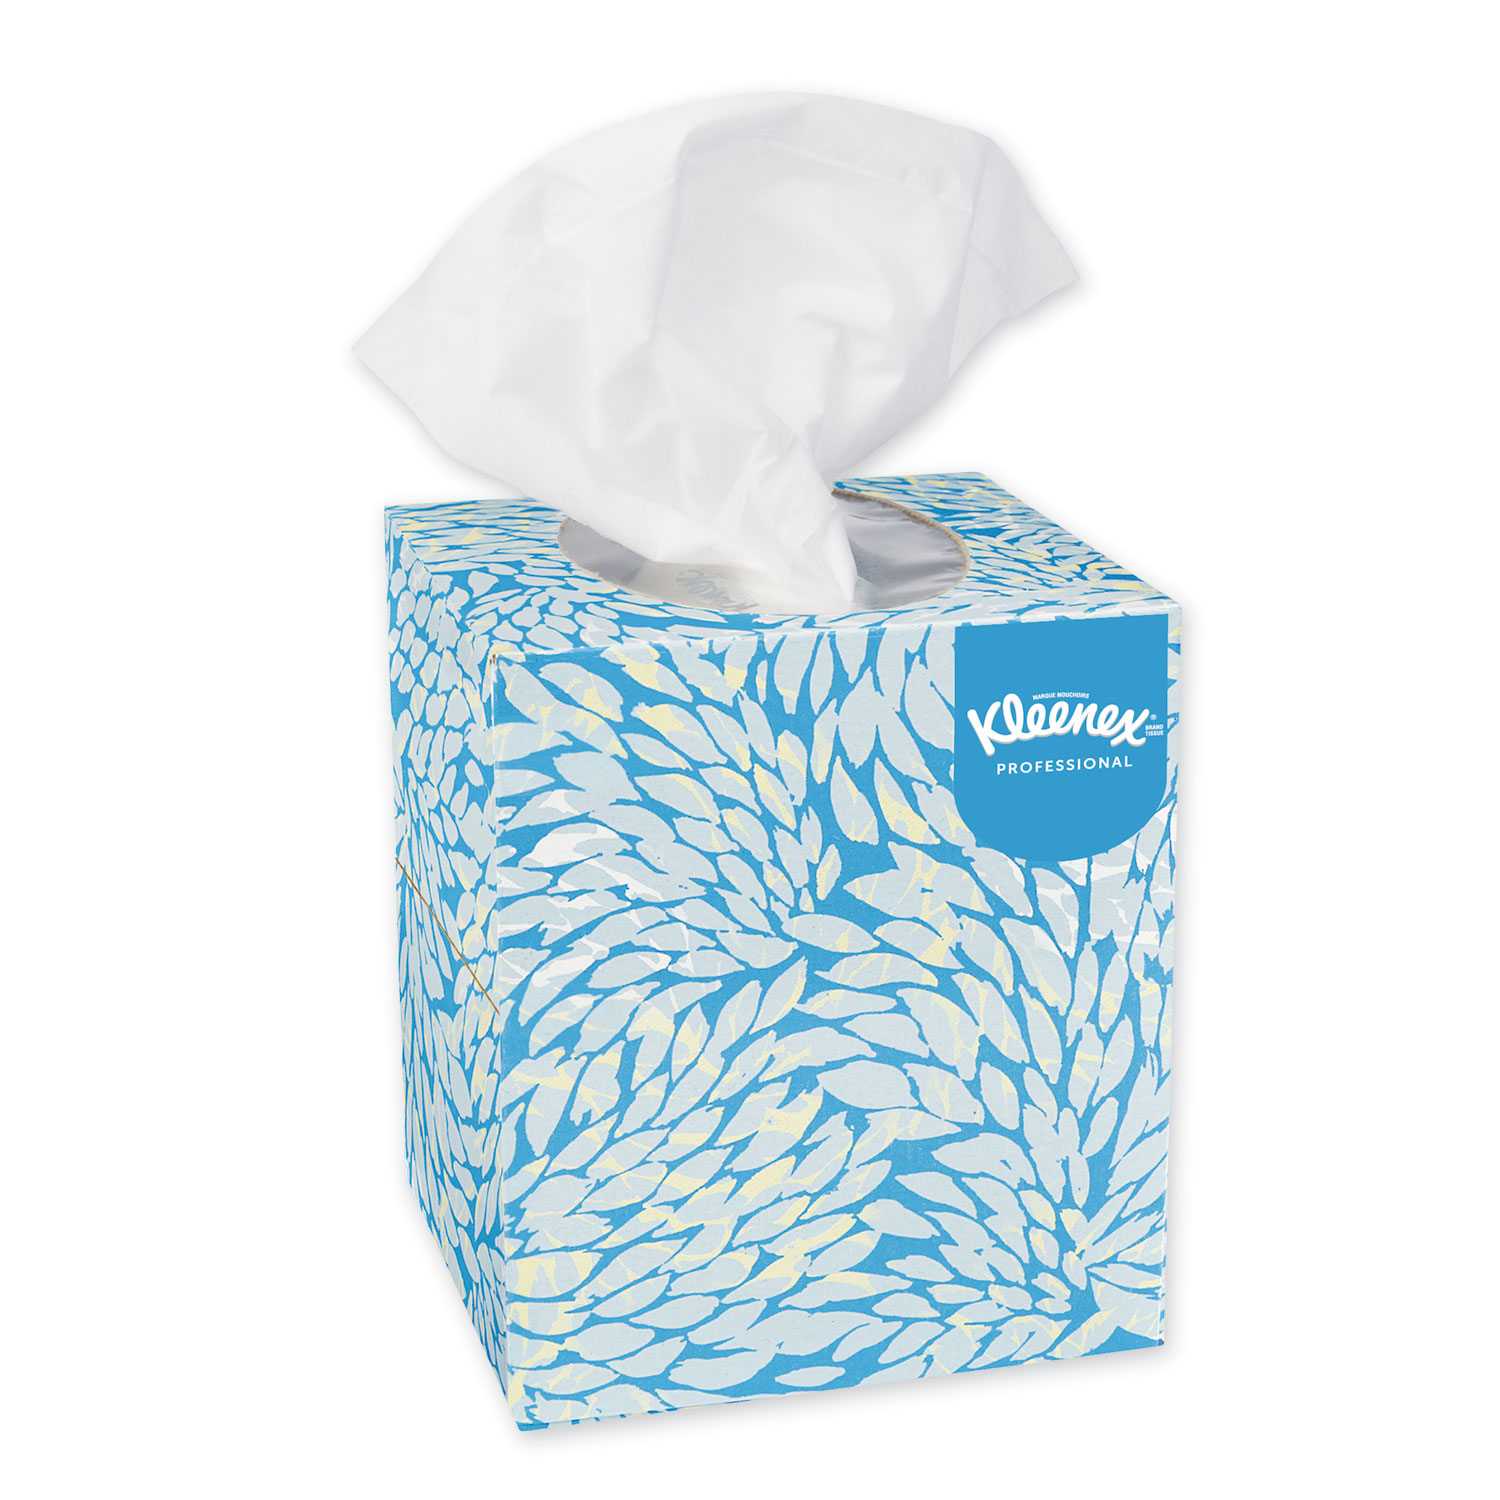  Kleenex 21271 Boutique White Facial Tissue, 2-Ply, Pop-Up Box, 95 Sheets/Box, 6 Boxes/Pack (KCC21271) 